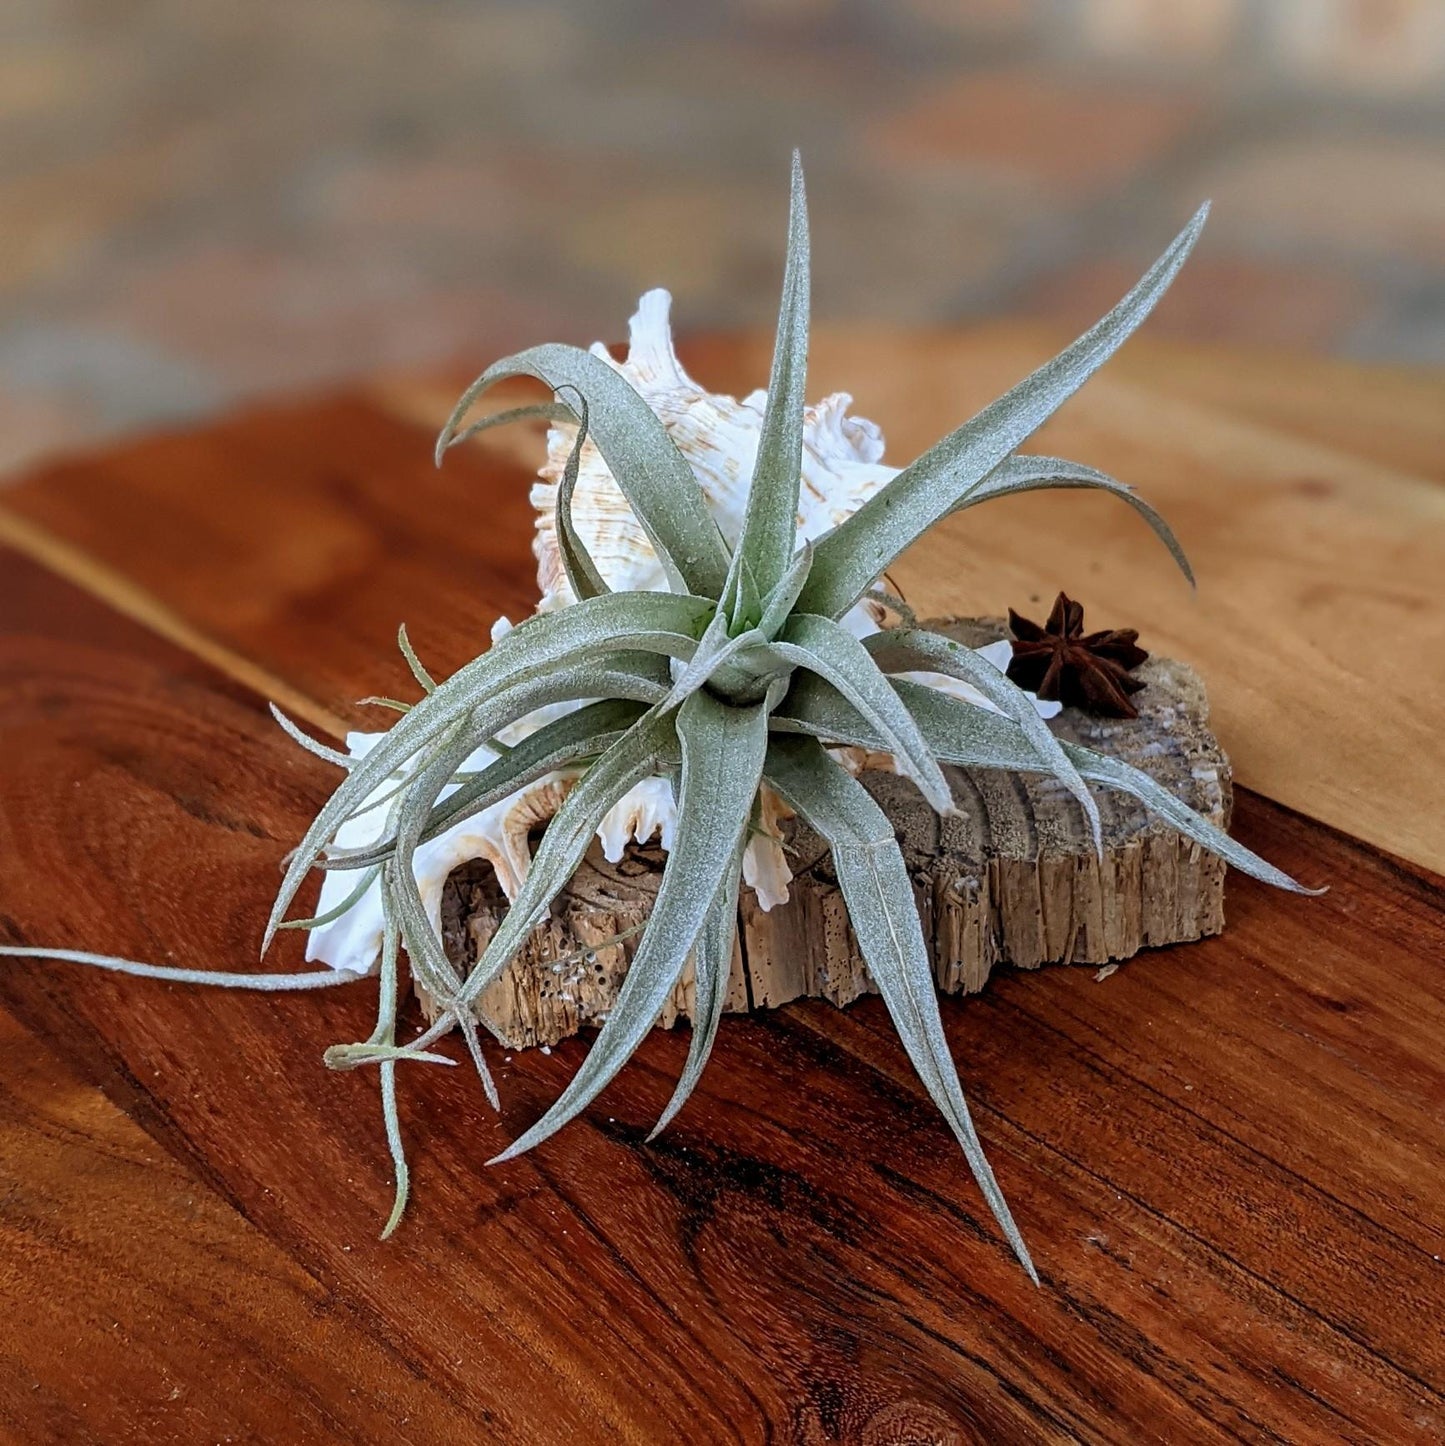 Handmade Assorted Live Plant Favors | Rustic Beach Decor | Unique Wedding, Party and Shower Favors